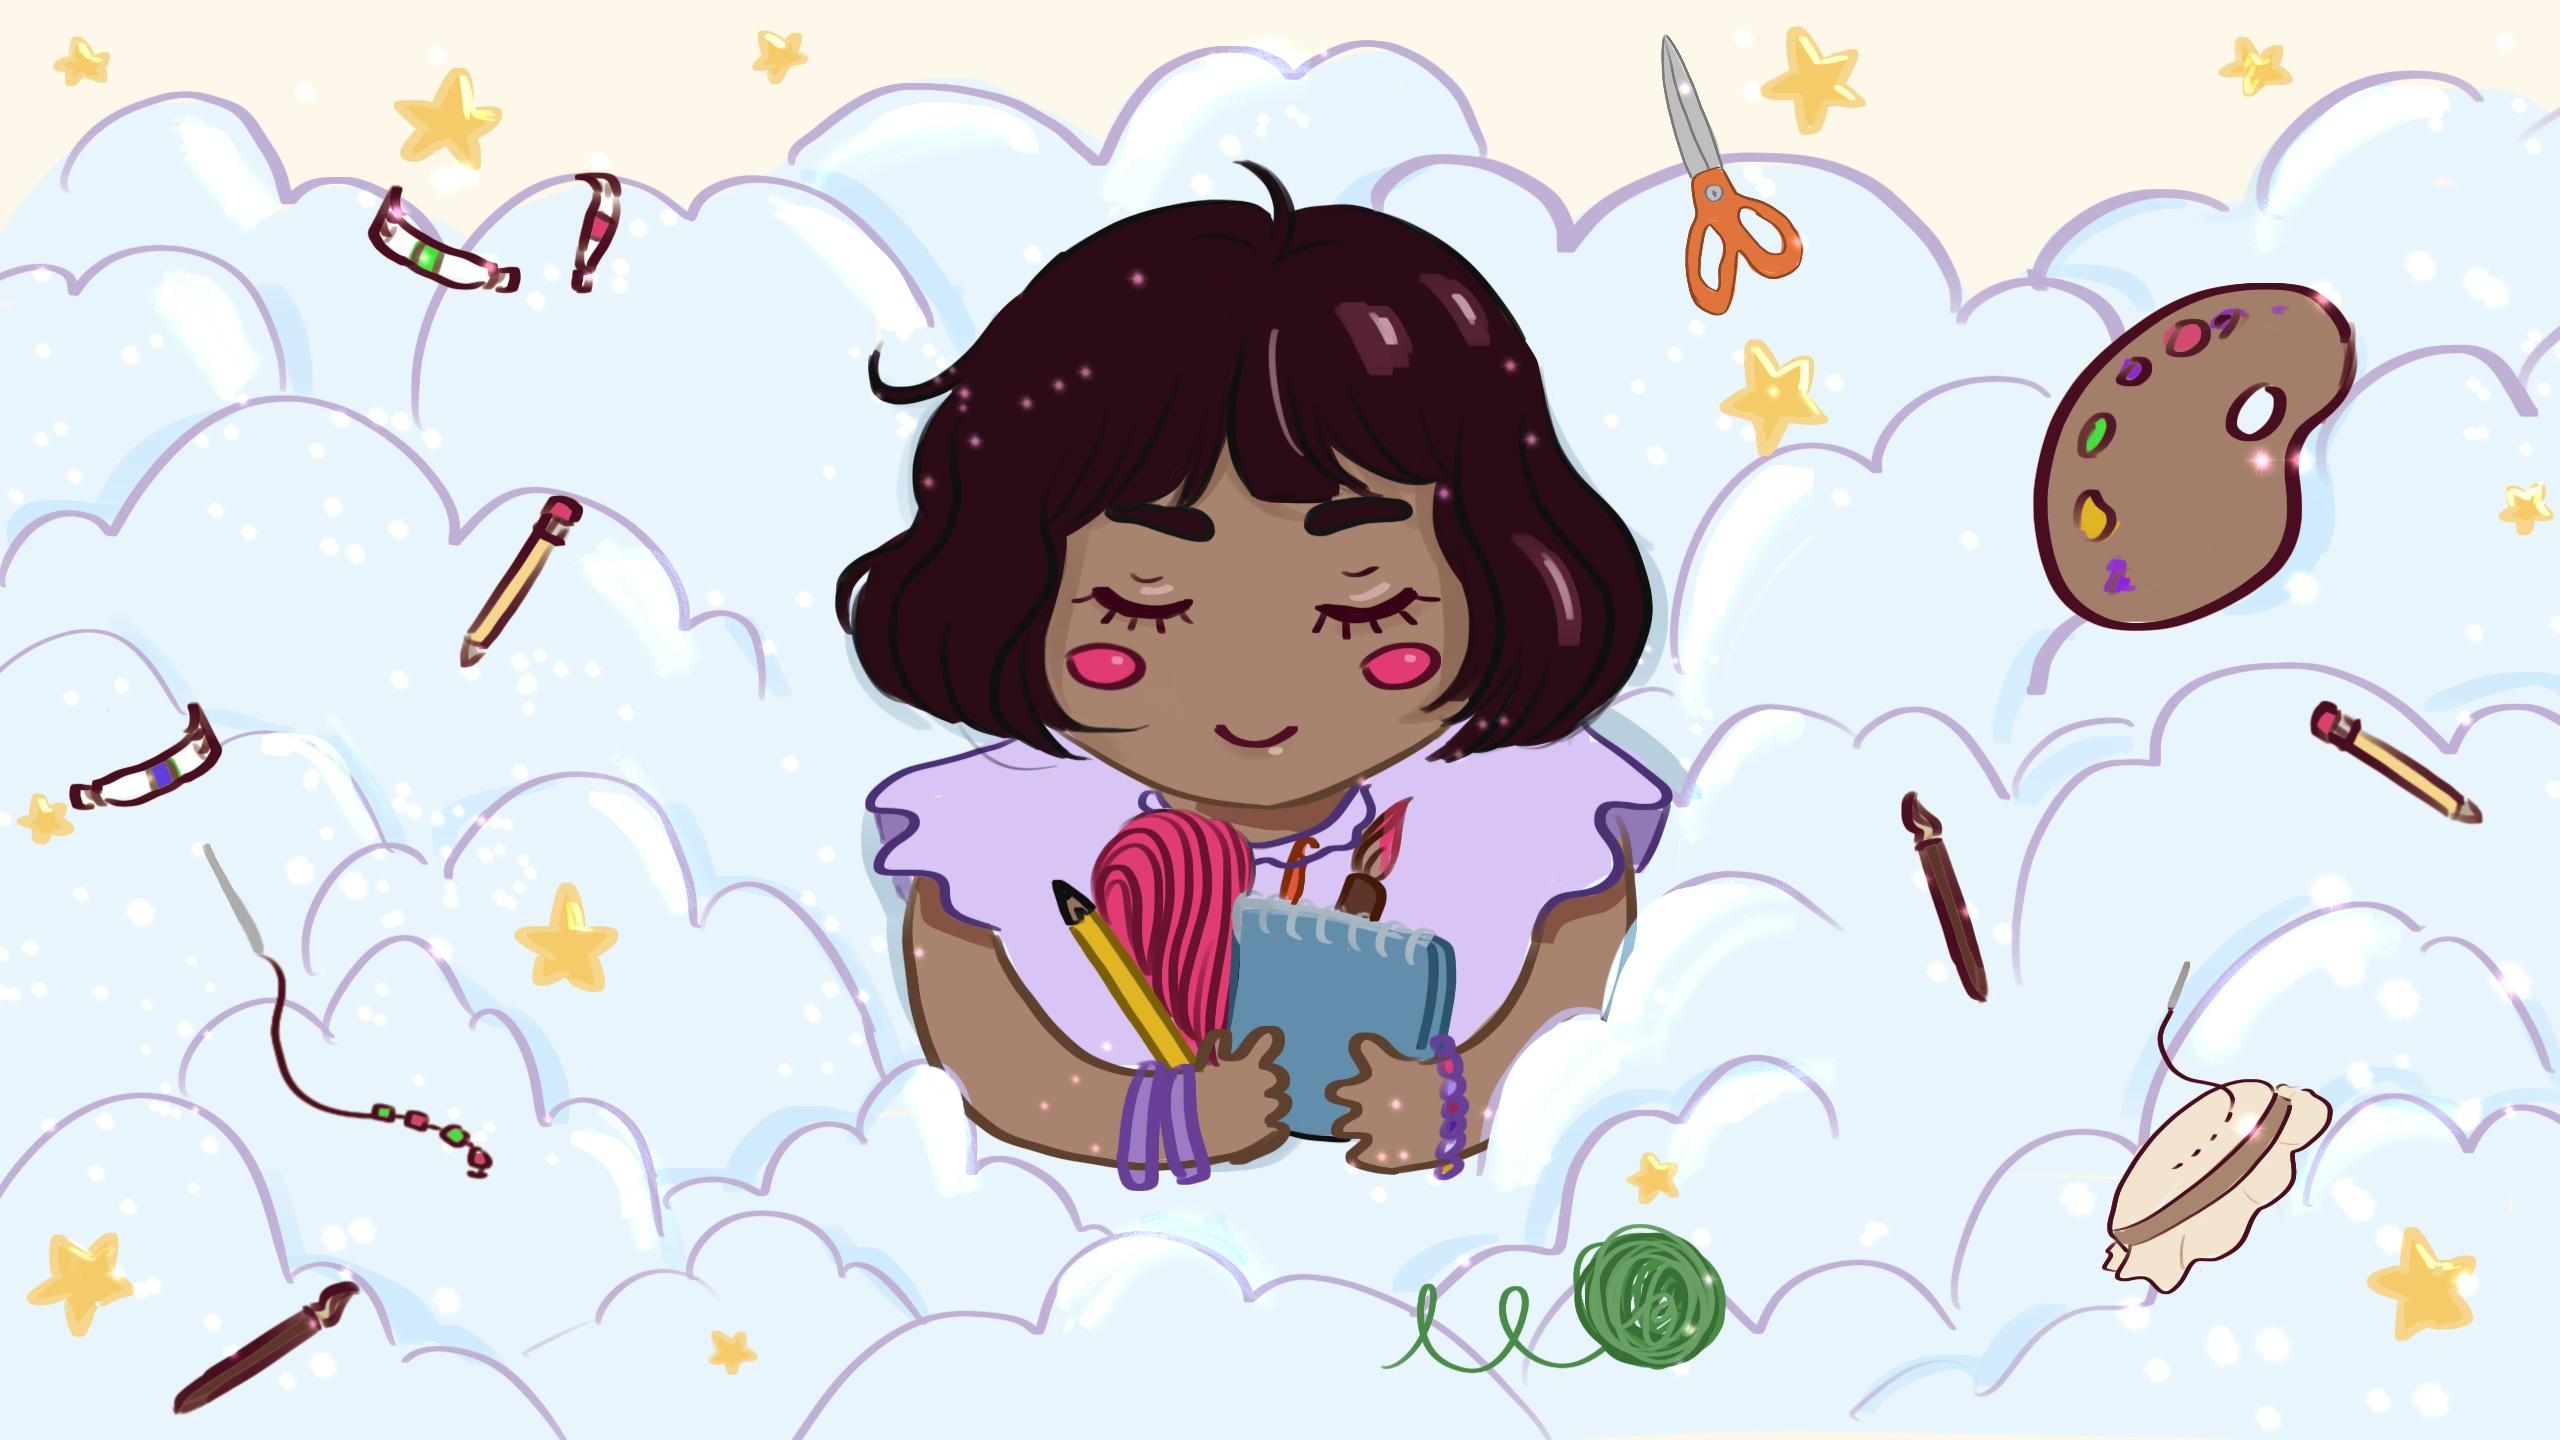 Person sitting in between clouds, hugging a sketch pad, ball of yarn, paint brush, and pencil. In between the clouds are paint tubes, pencils, yarn and other artistic material. There are sparkles everywhere.